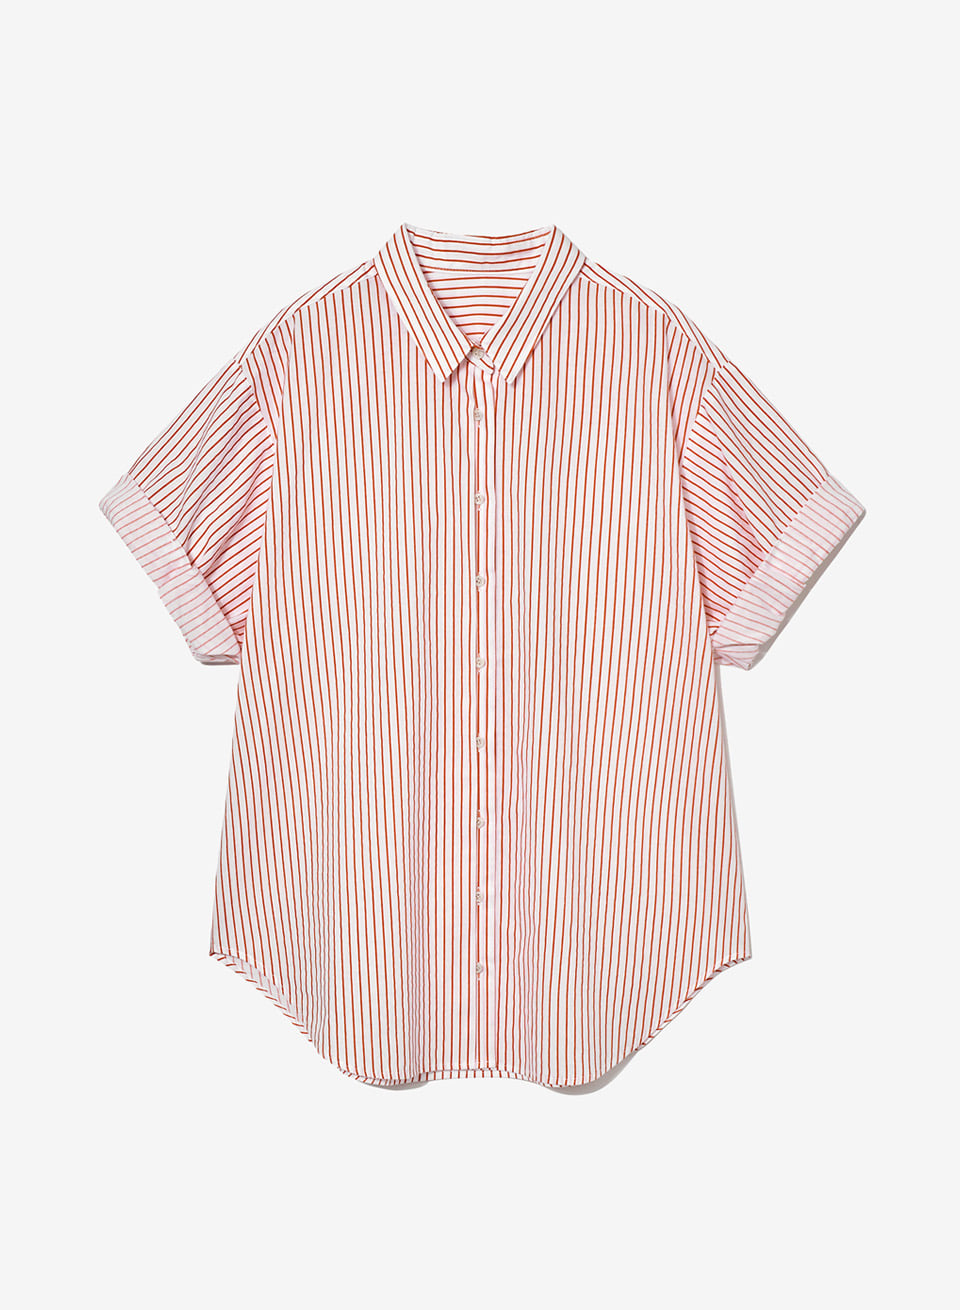 STRIPE SLEEVE ROLL-UP SHIRT_RED